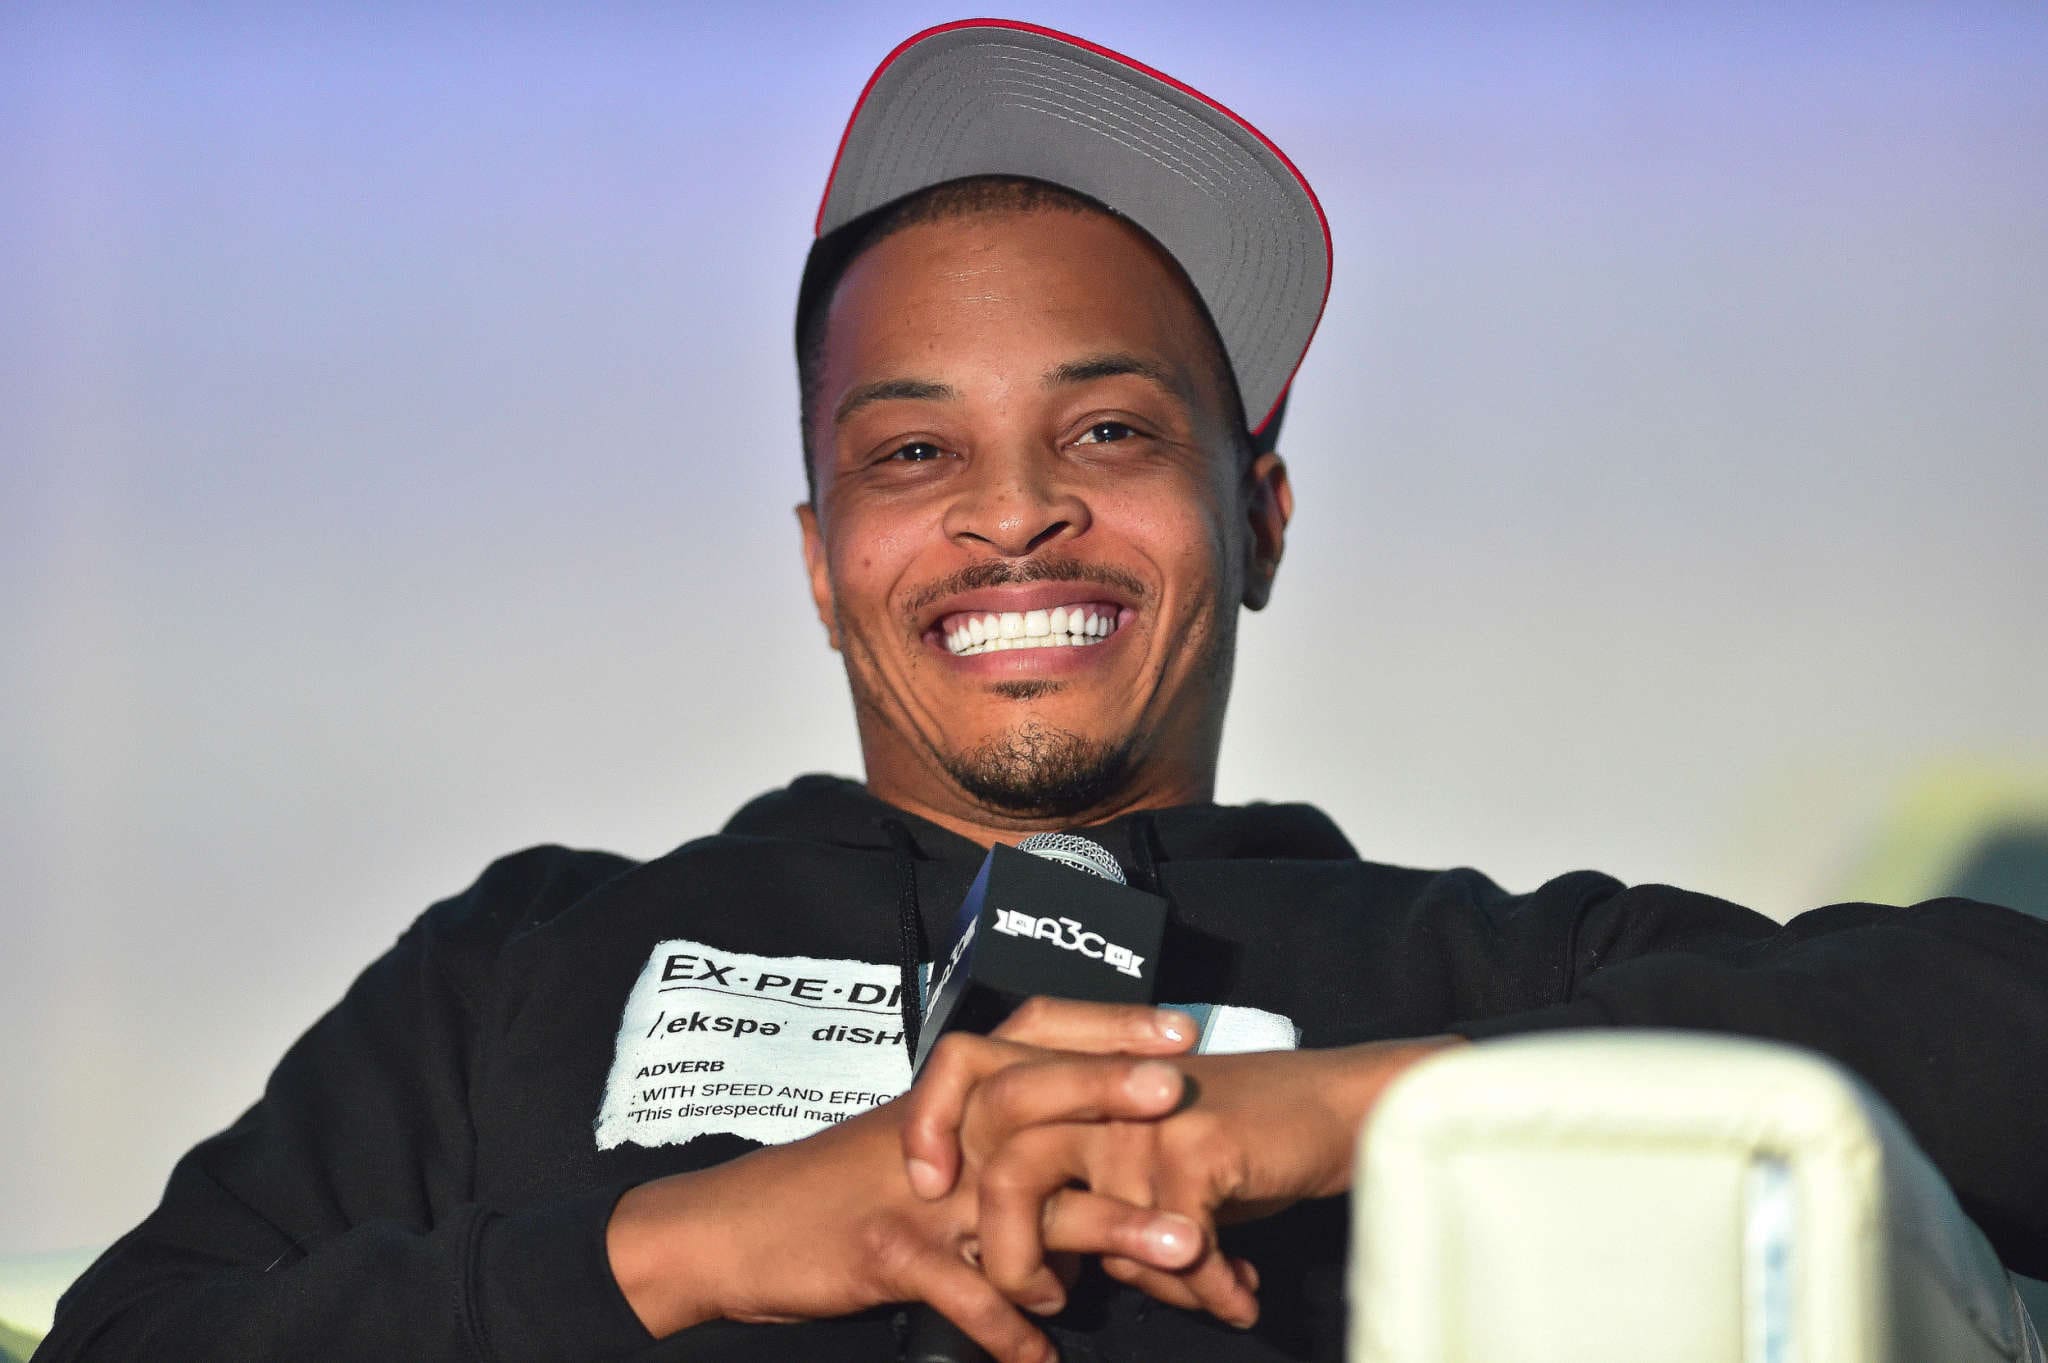 T.I. Gushes Over Amber Ruffin - Check Out The Video He Shared